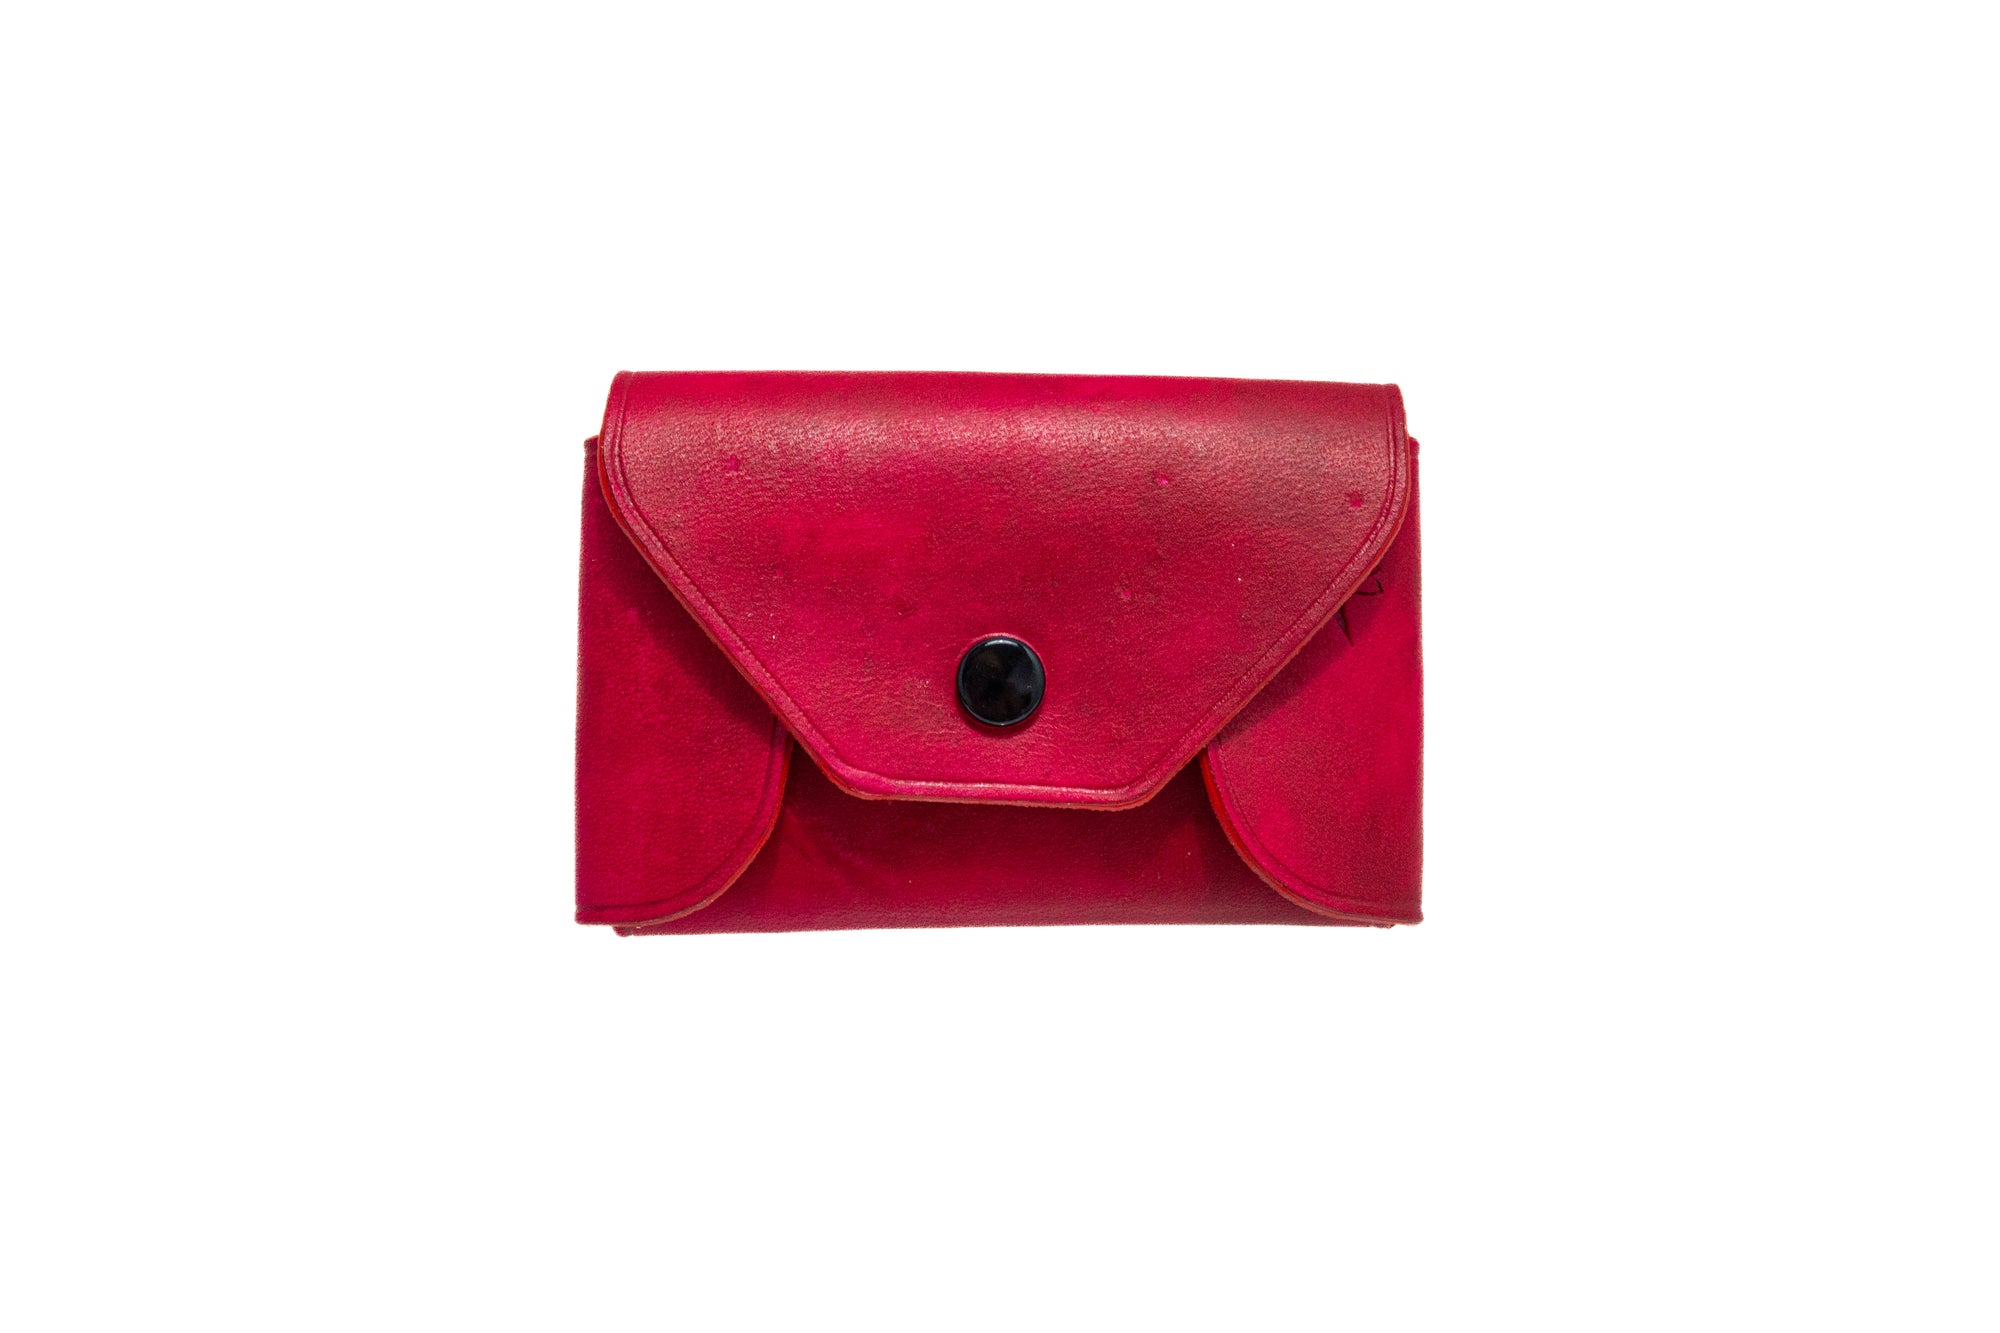 Handcrafted Leather Pouches